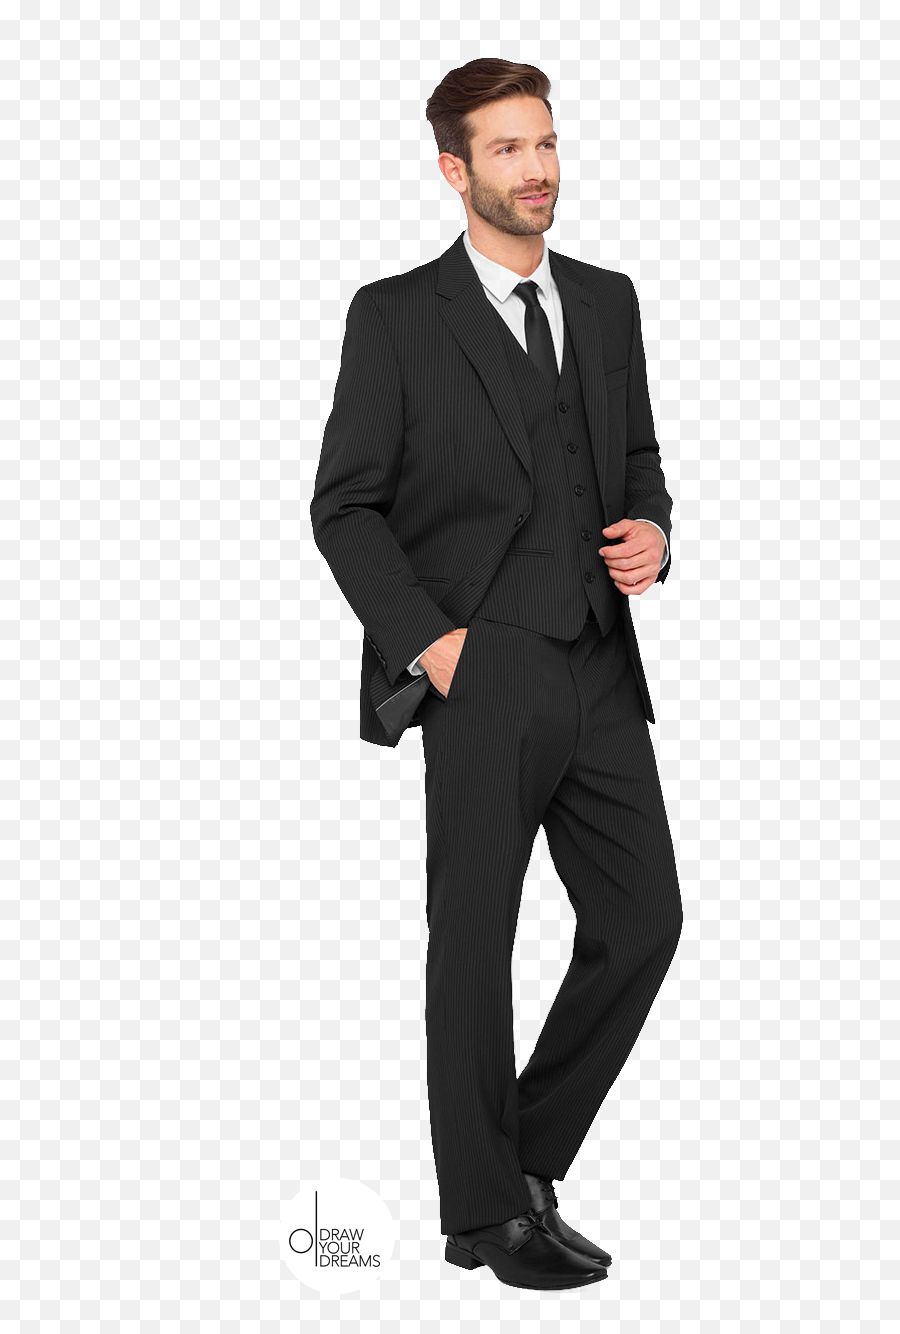 Drawyourdreams - Person In Suit For Photoshop Emoji,Personas Png